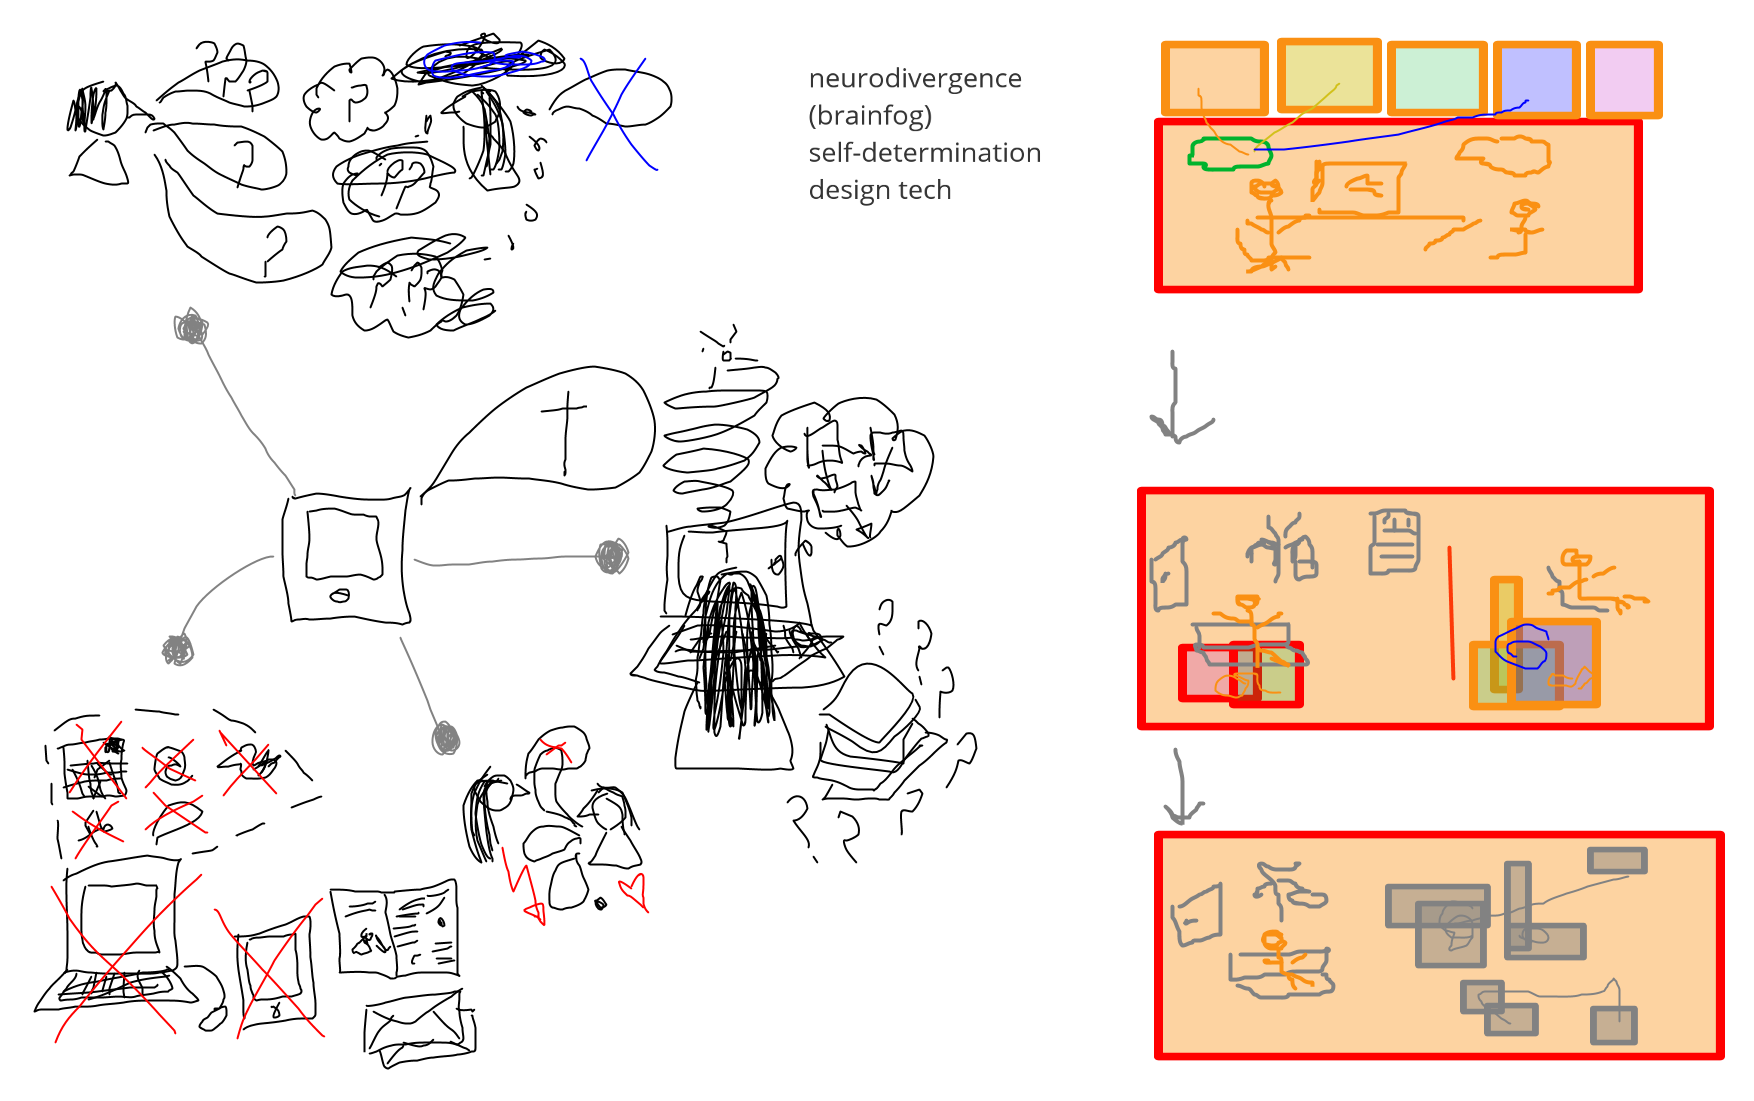 This image shows two drawings, one in black-and-white on the left and one in mainly red and orange colour on the right. Between the two drawings are written the words neurodivergence, brainfog, self-determination and design tech. The left drawing shows four scenes from death-related bereavement, including a person not being able to follow a conversation or answer questions, a person being cut off while they're talking and a person sitting in front of a laptop being confused about the structure of information provided on it. The right drawing shows three scenes from chemo therapy related to cancer, including two people sitting next to each other with one being linked to colourful boxes above them, a scene showing a person sitting on top of these boxes and a scene with a person on a couch far away from the boxes, which are now gray, on top of each other and connected by squiggly lines.